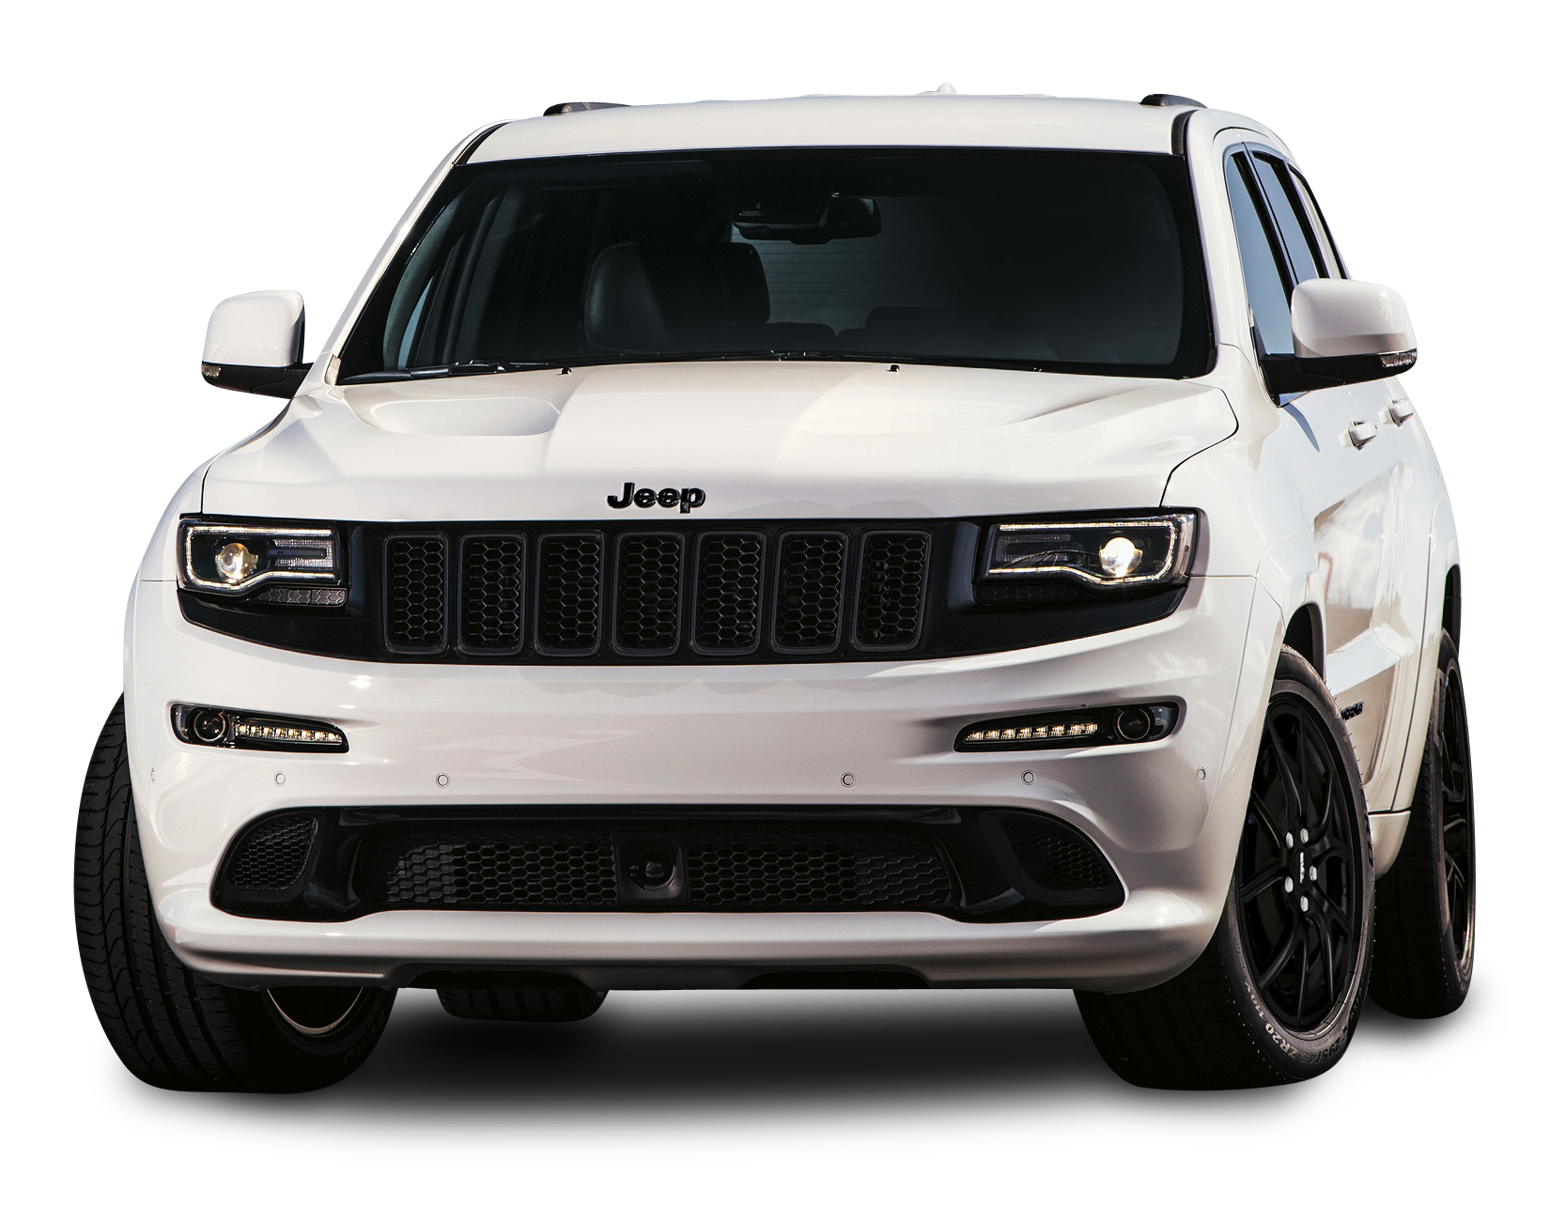 Jeep Grand Cherokee Srt White Car Png Image - Car, Transparent background PNG HD thumbnail